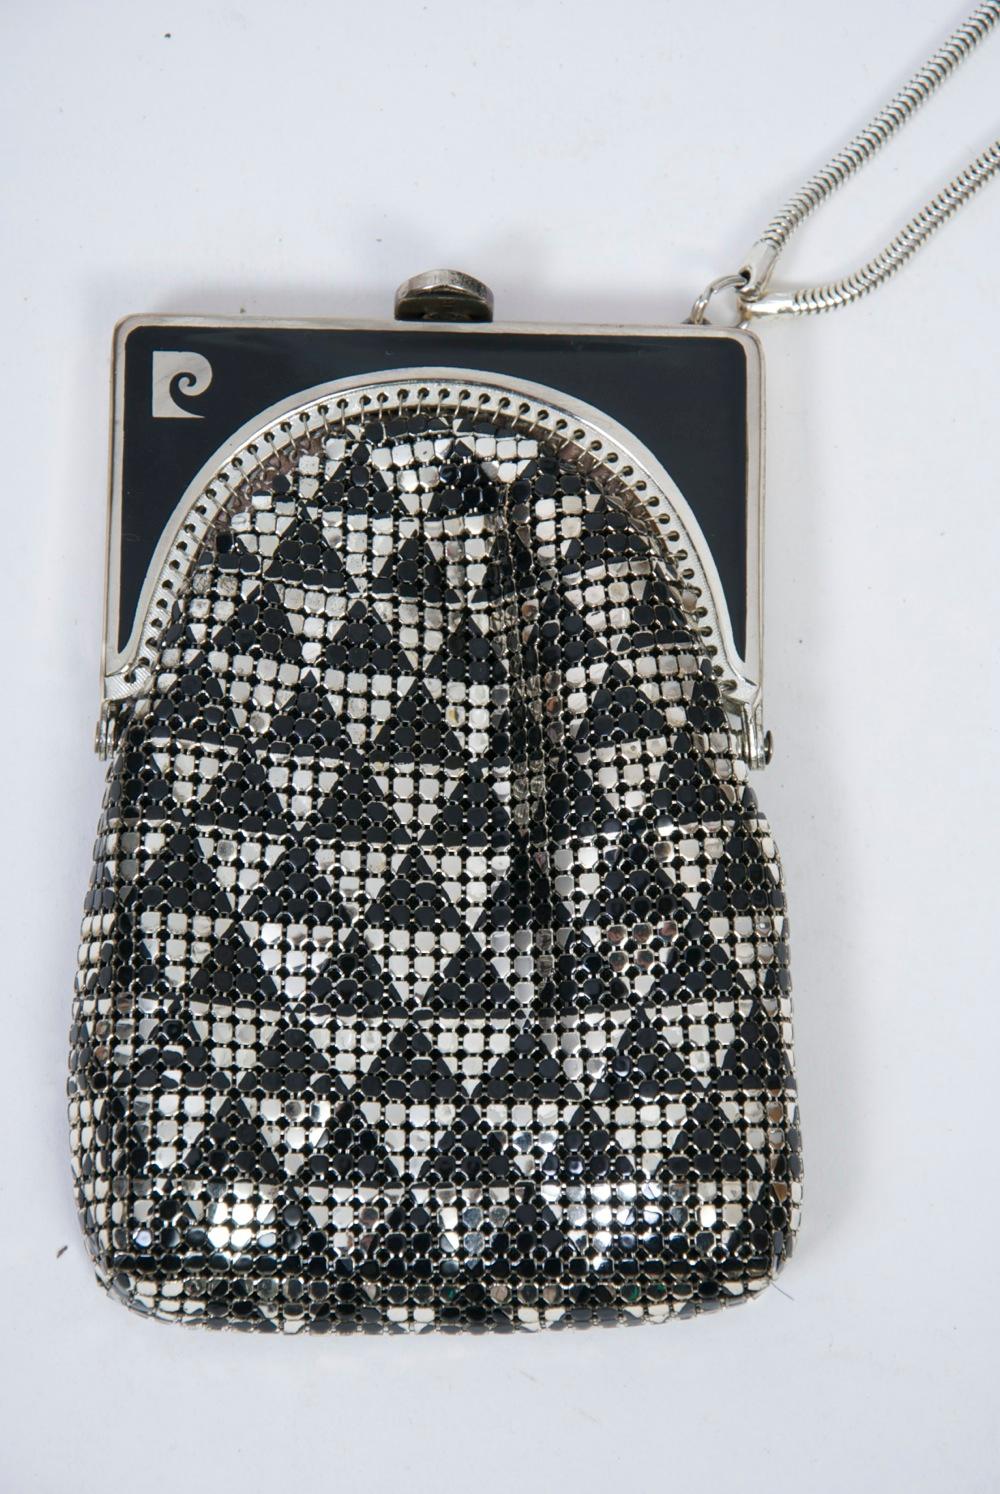 Pierre Cardin Art Deco-style evening pouch of silver and black metallic mesh arrayed in a diamond pattern. The black enameled silver metal frame sports the designer's logo in silver on the left. On the right side of the frame is a silver snake chain